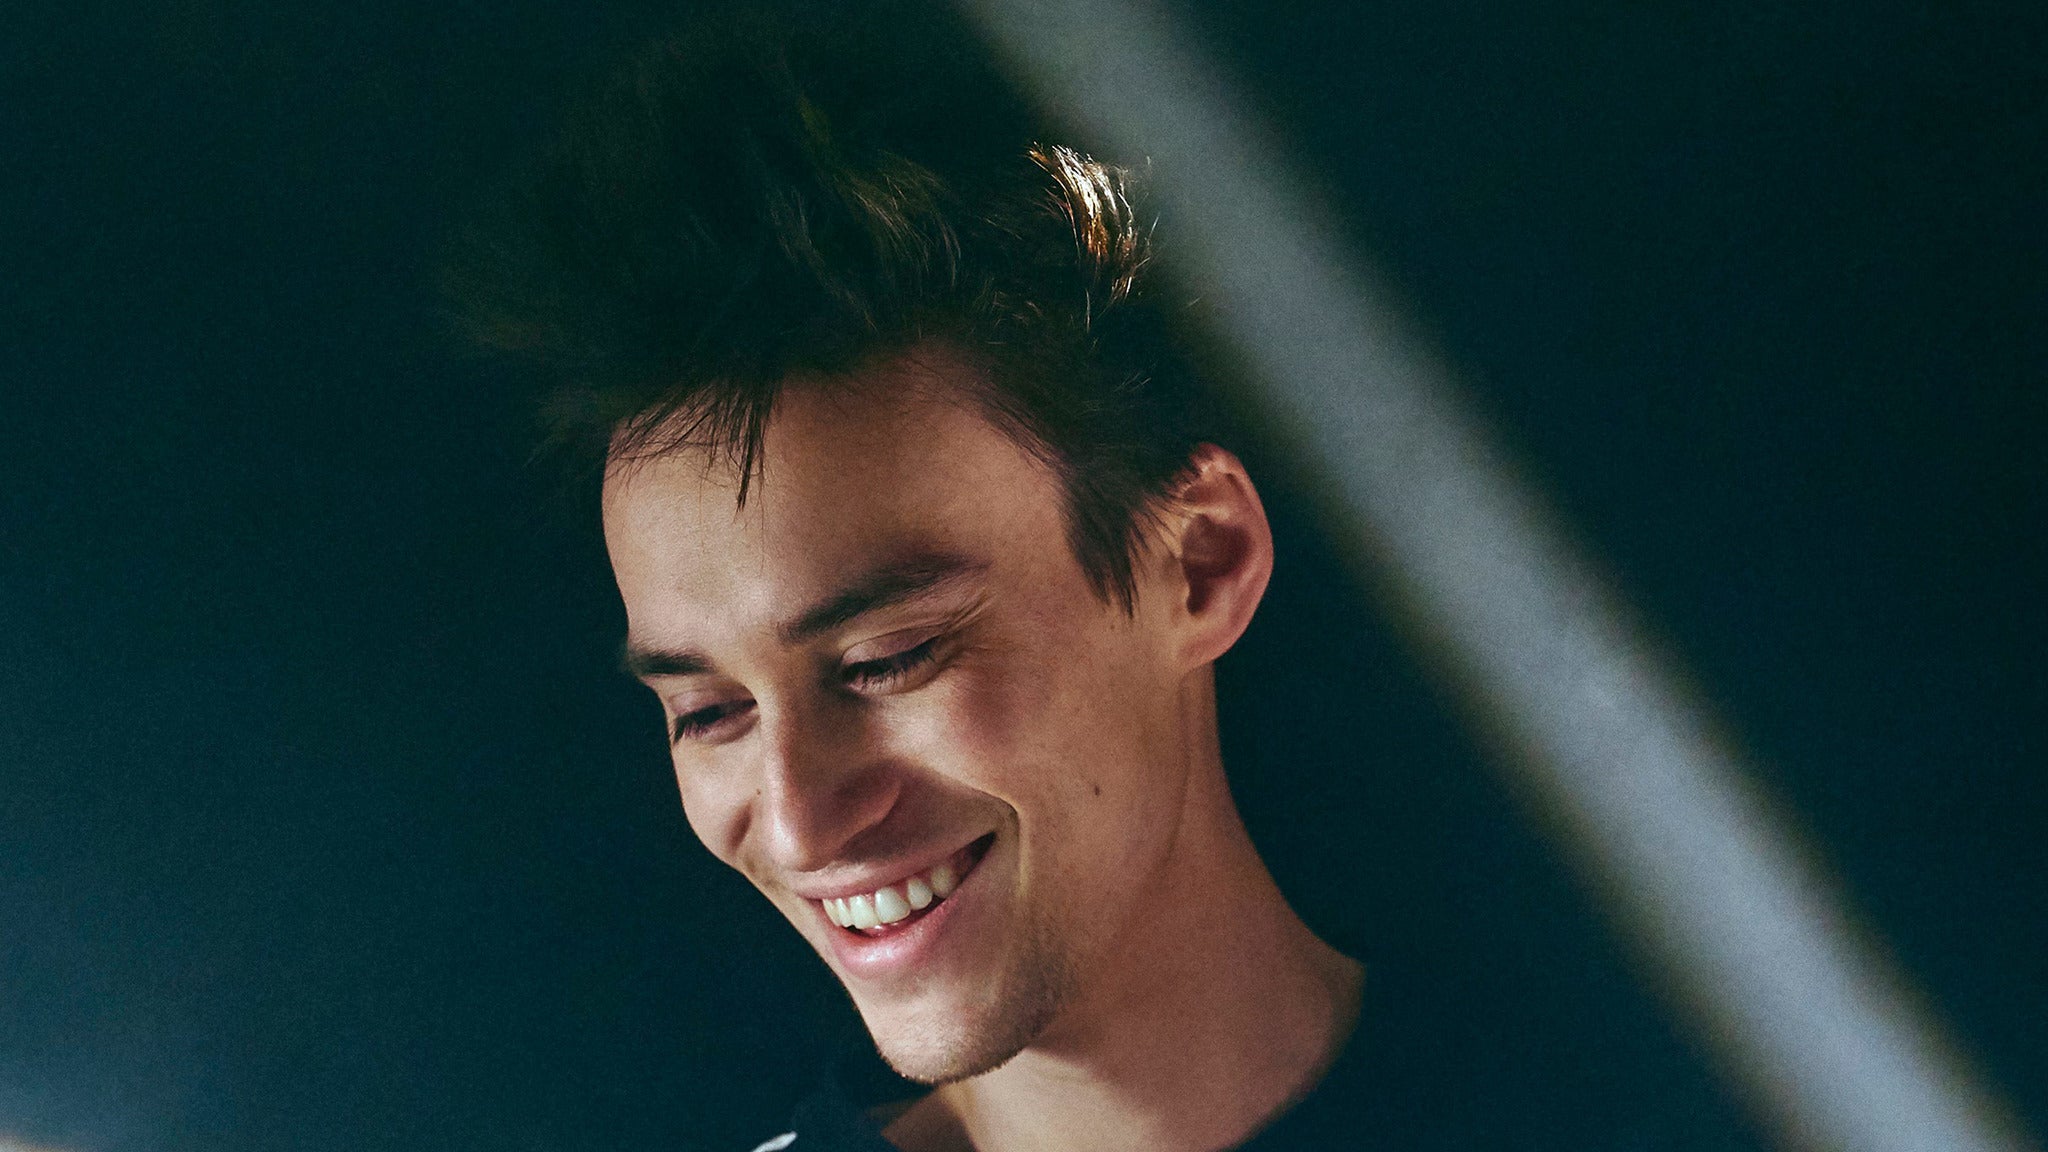 Jacob Collier - DJESSE WORLD TOUR SPRING 2022 - MOVED TO HISTORY in Toronto promo photo for VIP Package presale offer code